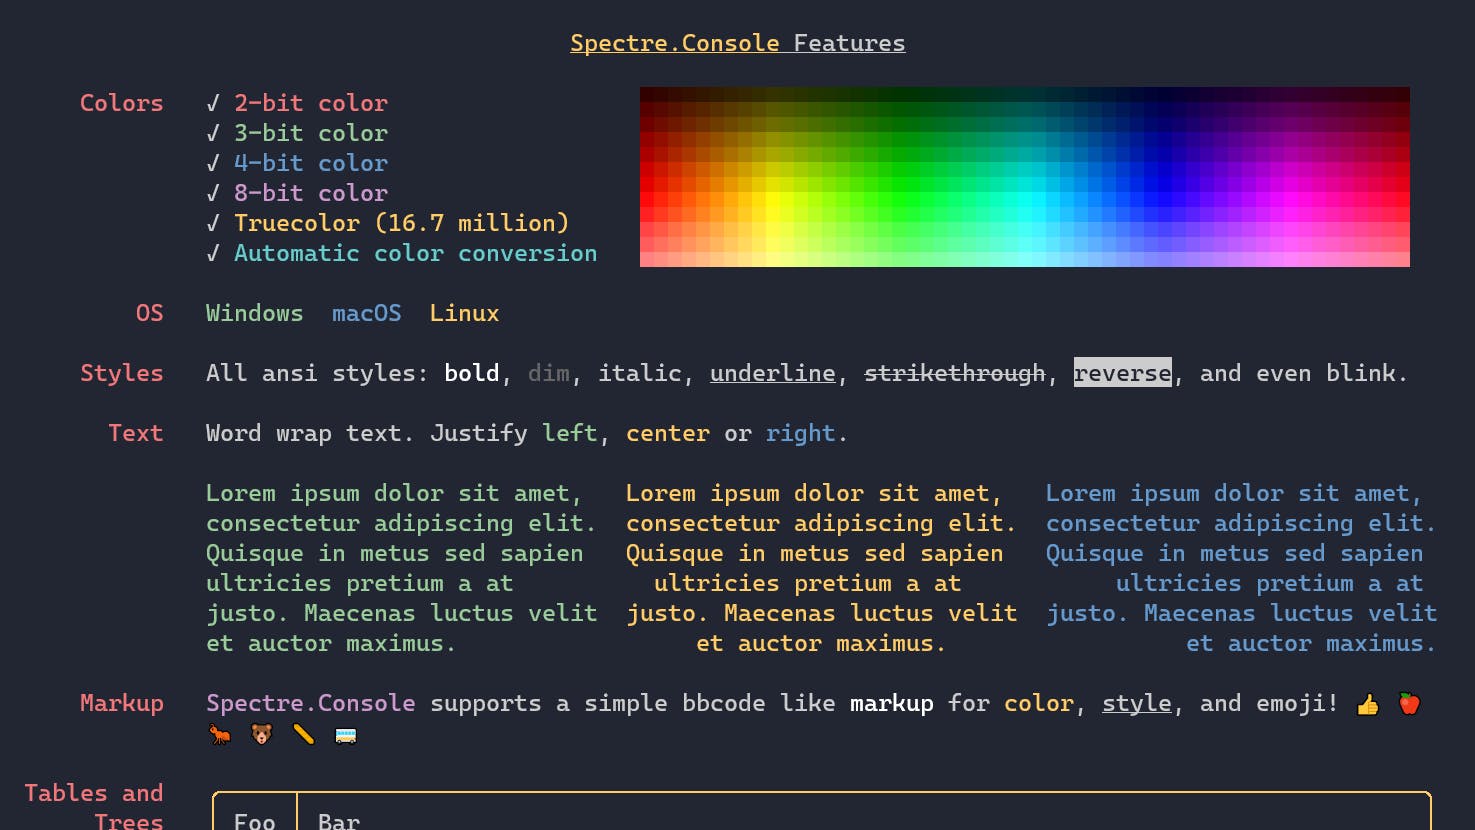 Small subset of Spectre.Console features, full picture on https://spectreconsole.net/#examples.